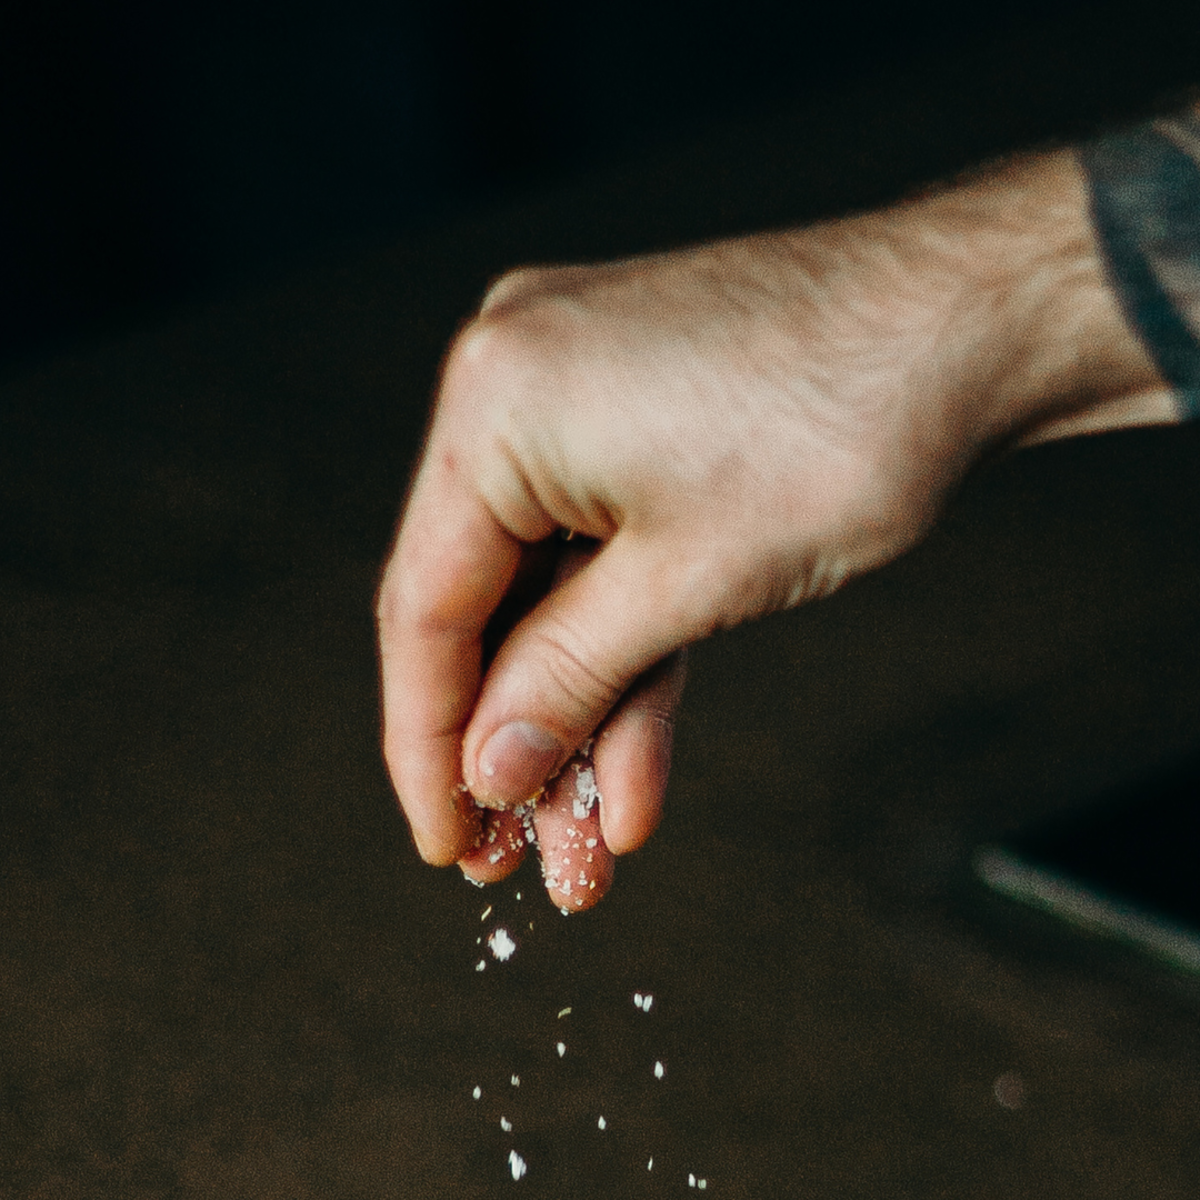 Sprinkle salt or blessed water around the corners of your home.